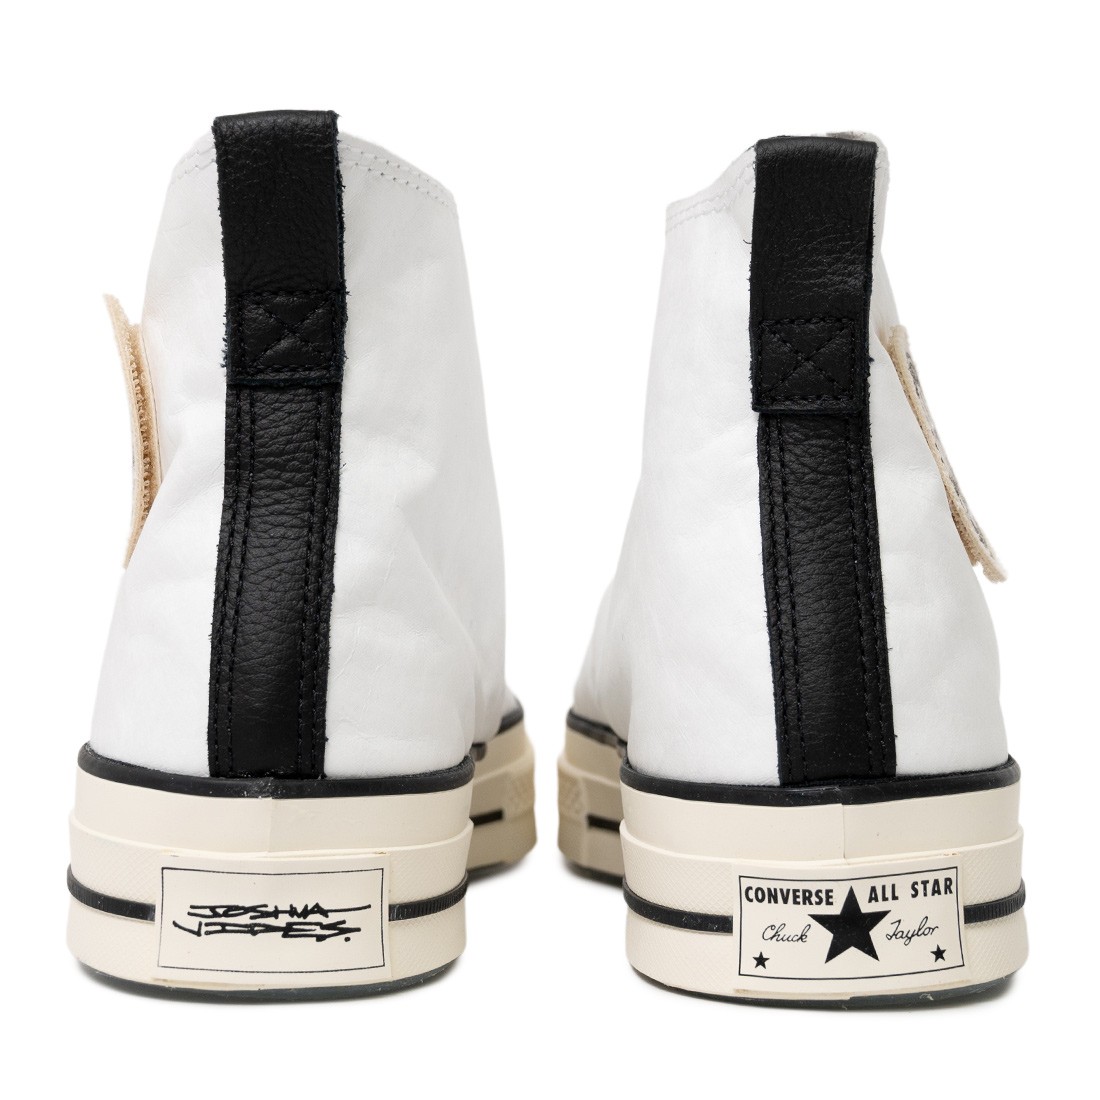 converse chuck taylor all star low profile poorman pro team